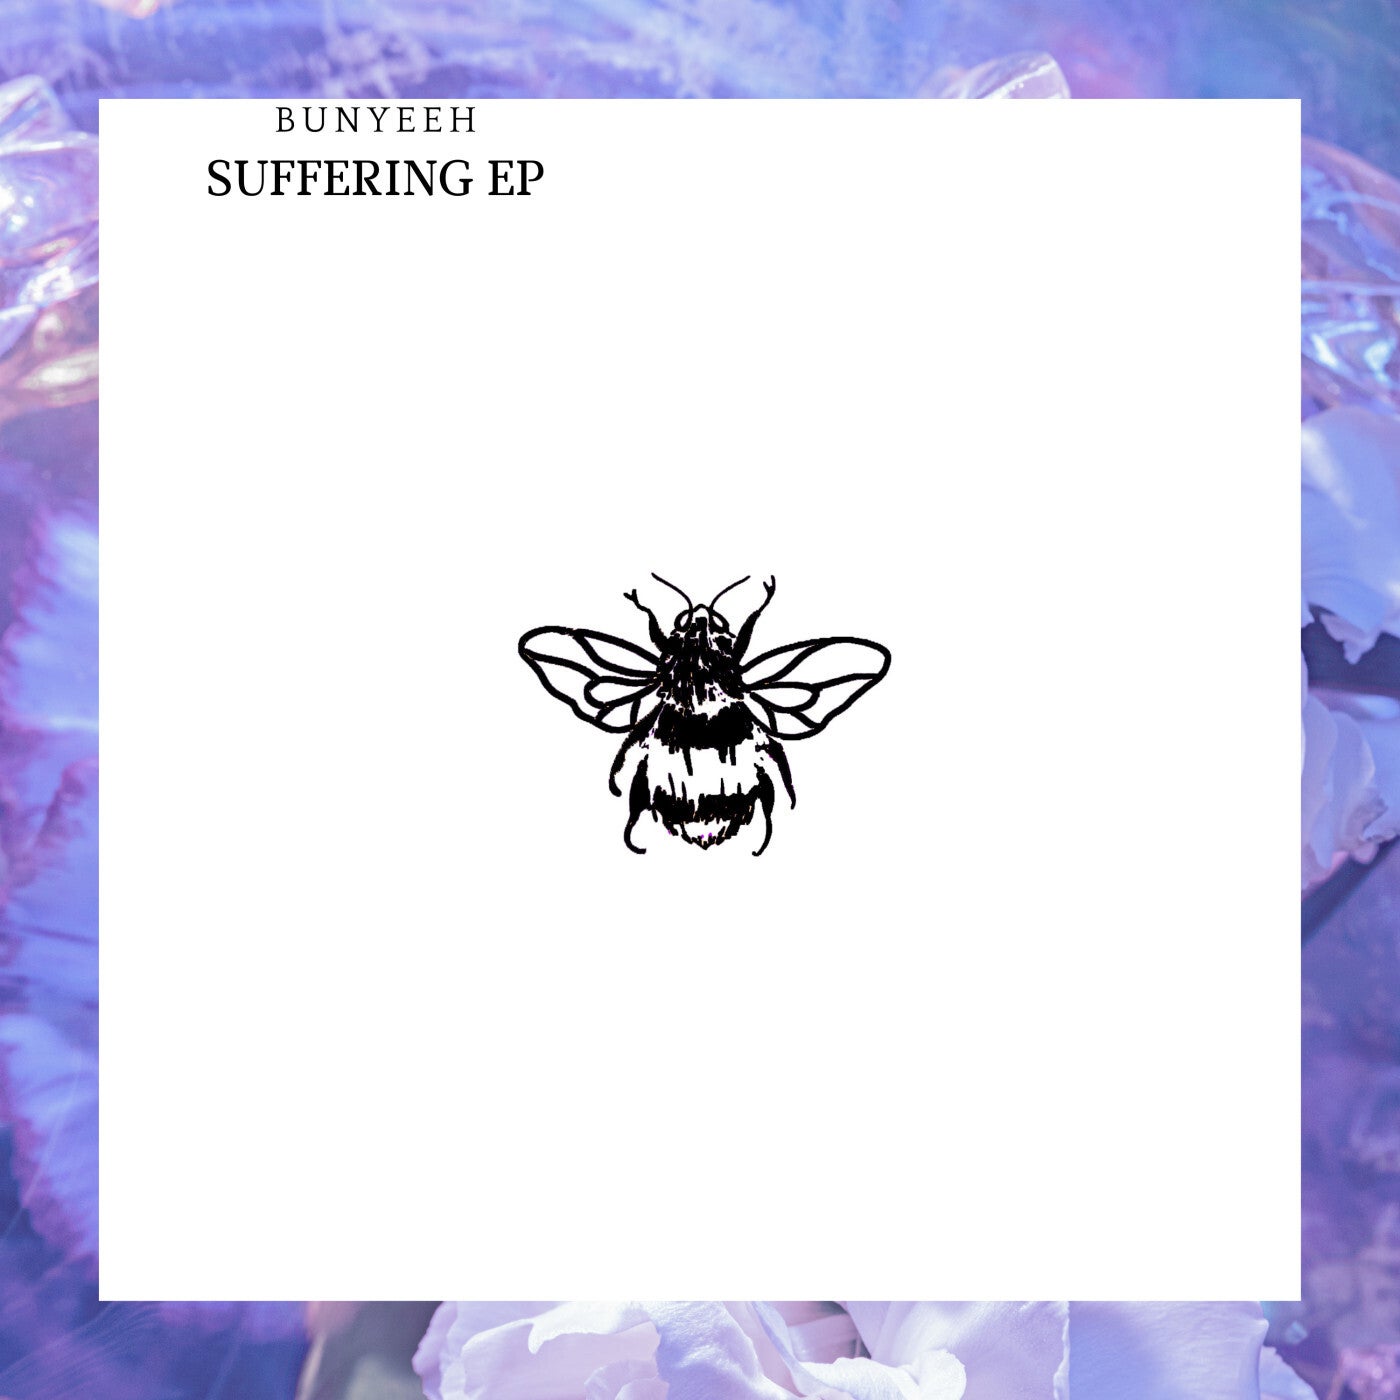 Suffering EP